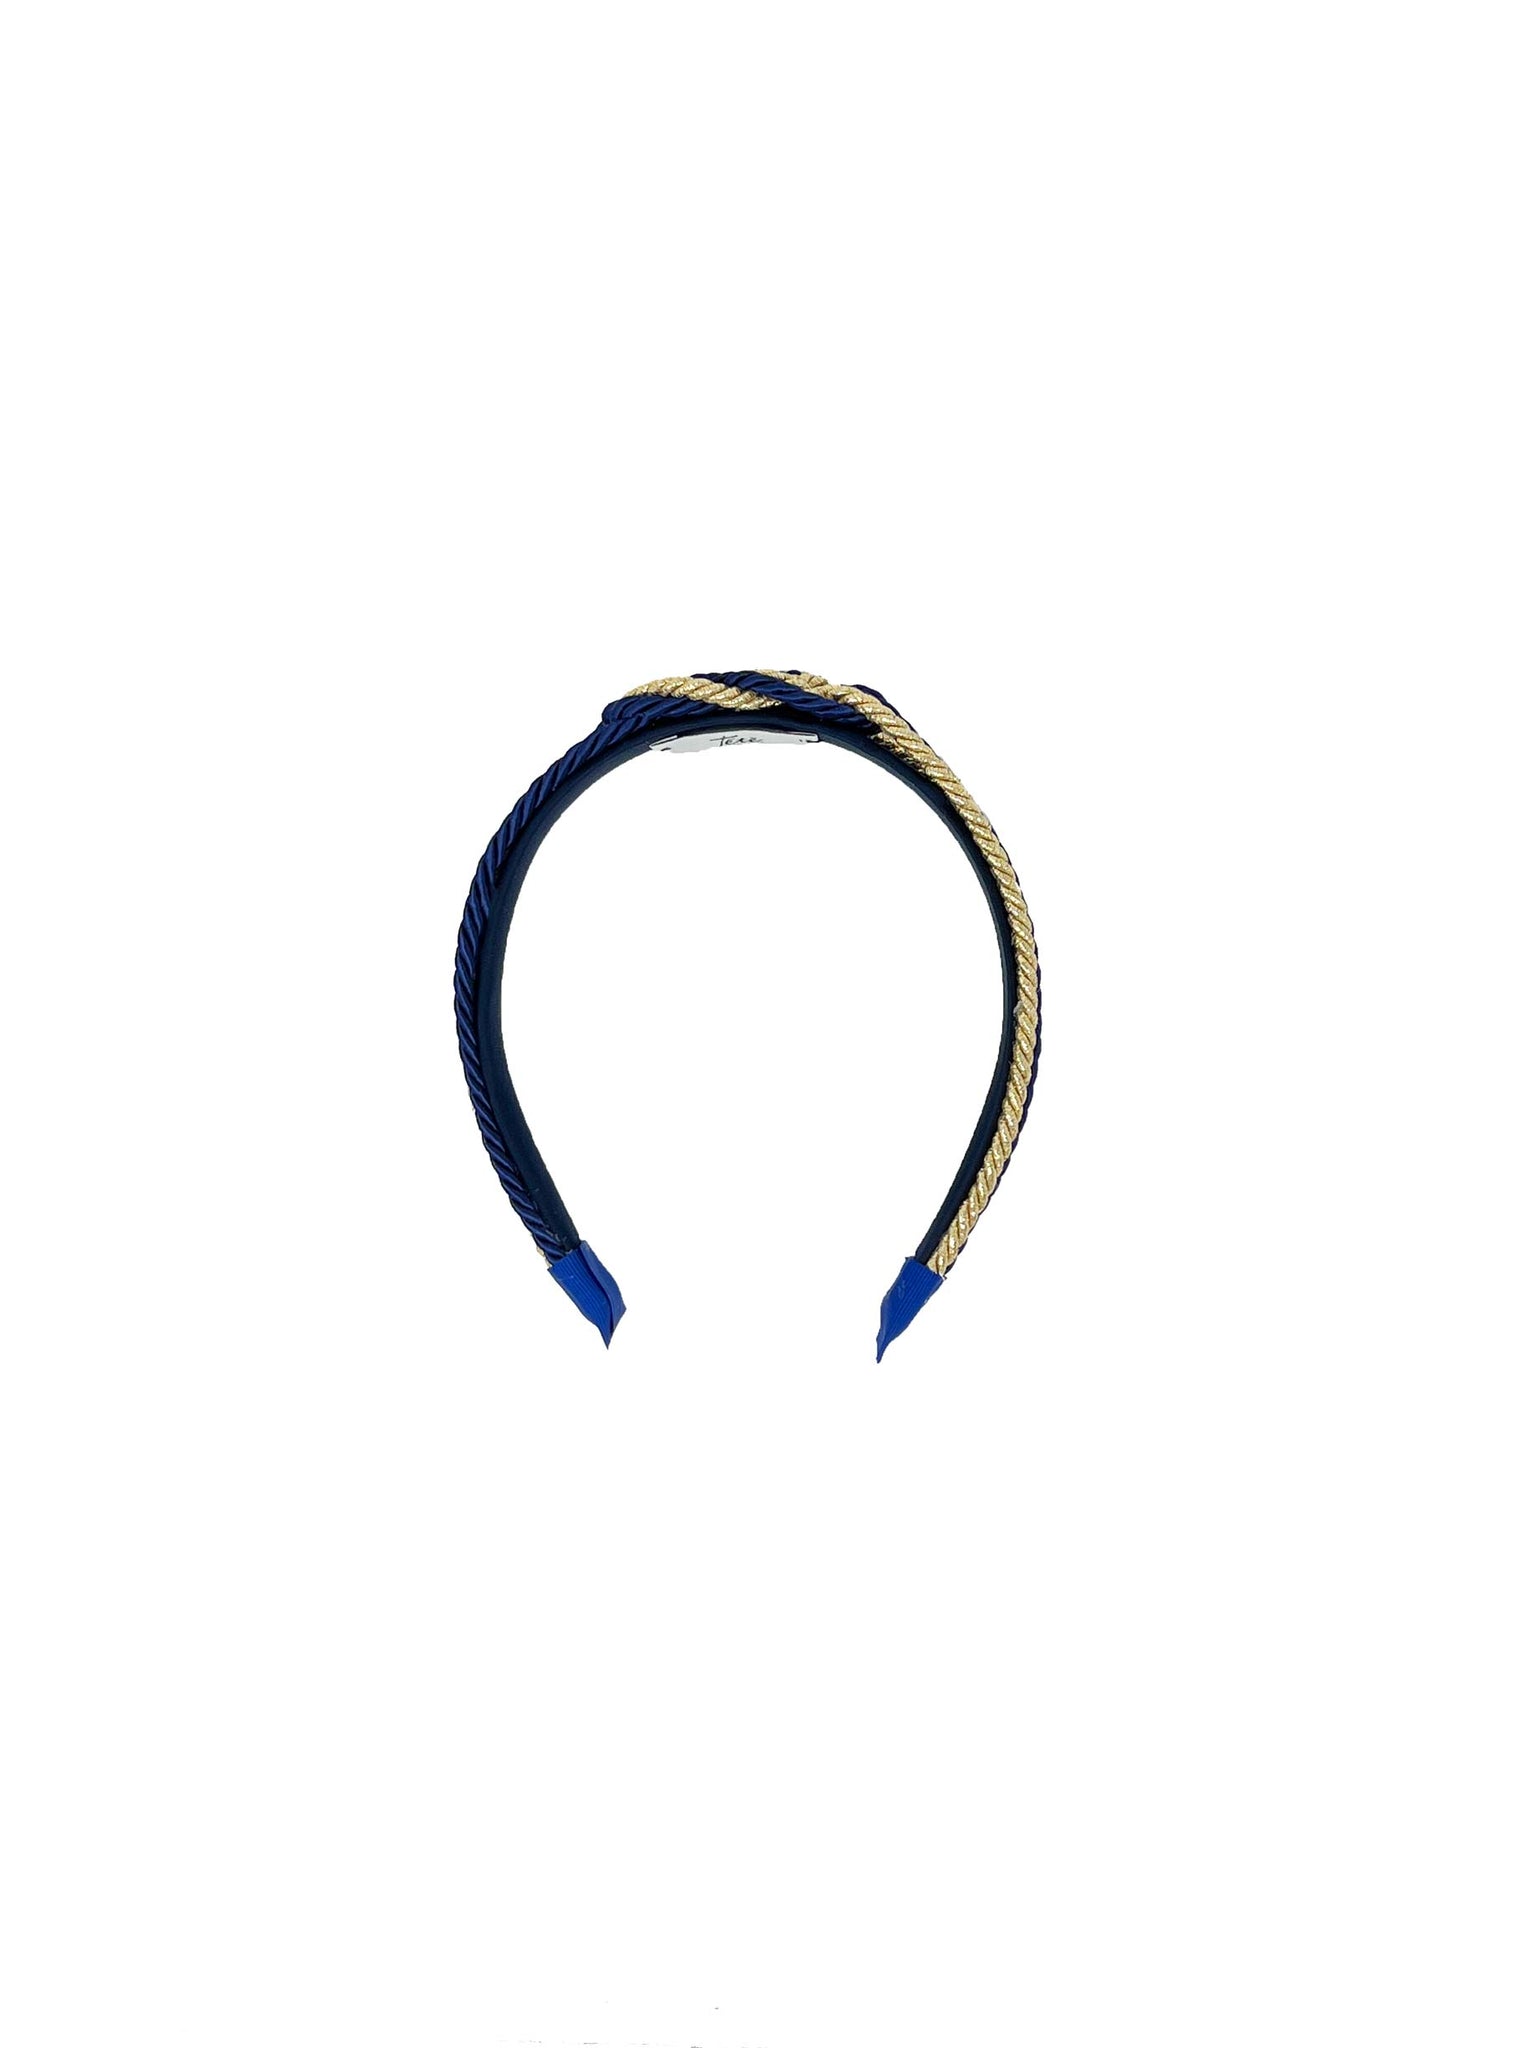 Blue and gold three-strand hairband with central braided knot